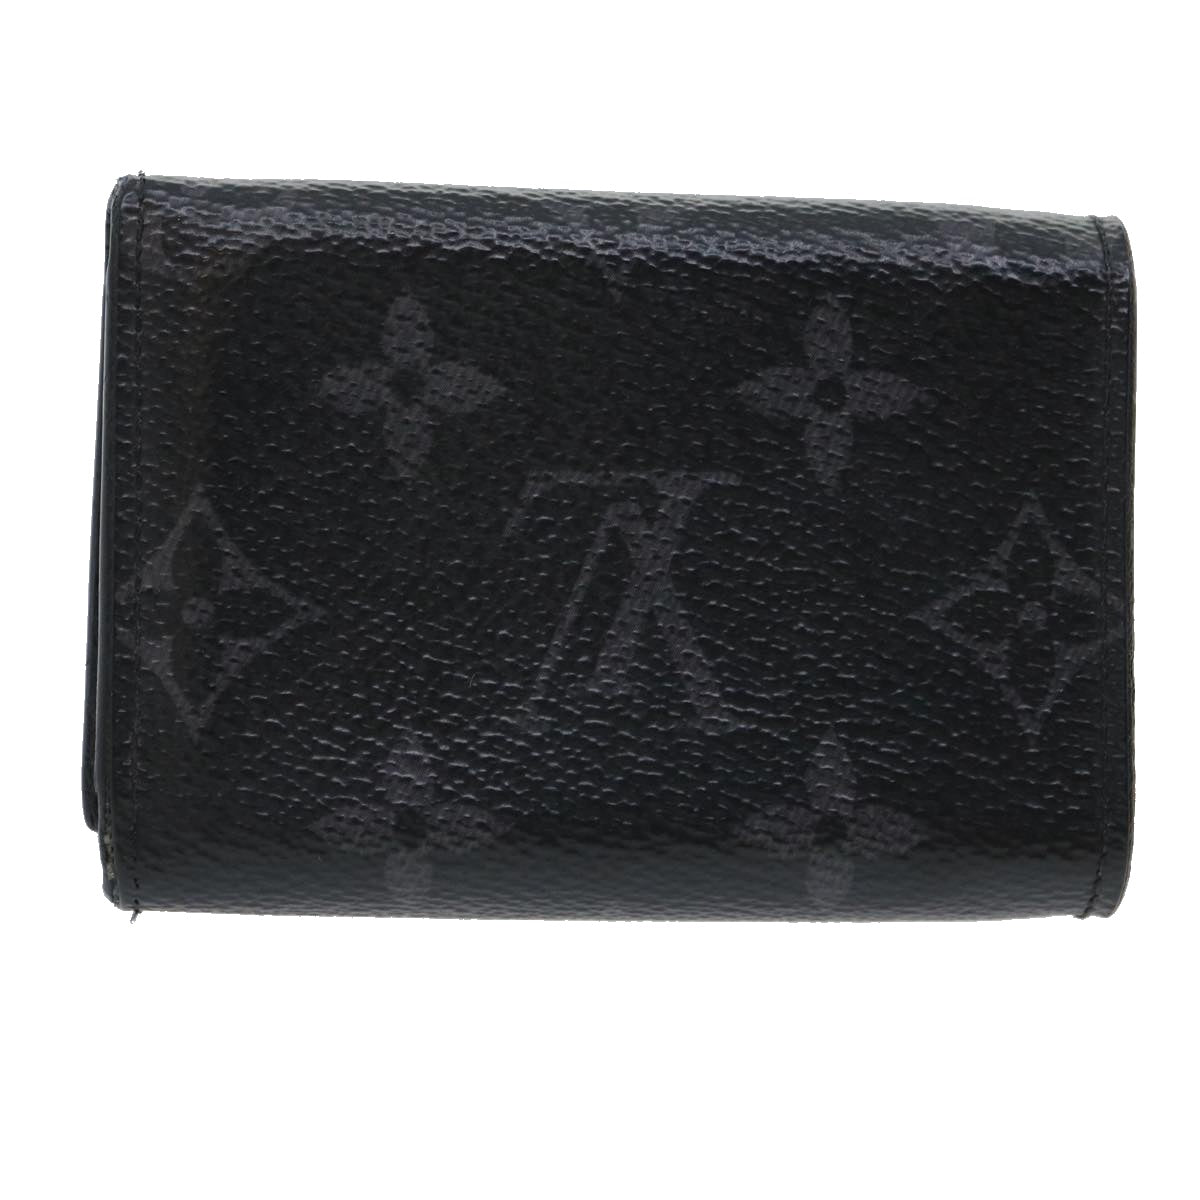 LOUISVUITTON Monogram Eclipse Reverse DiscoveryCompact Wallet M45417 Auth 30594